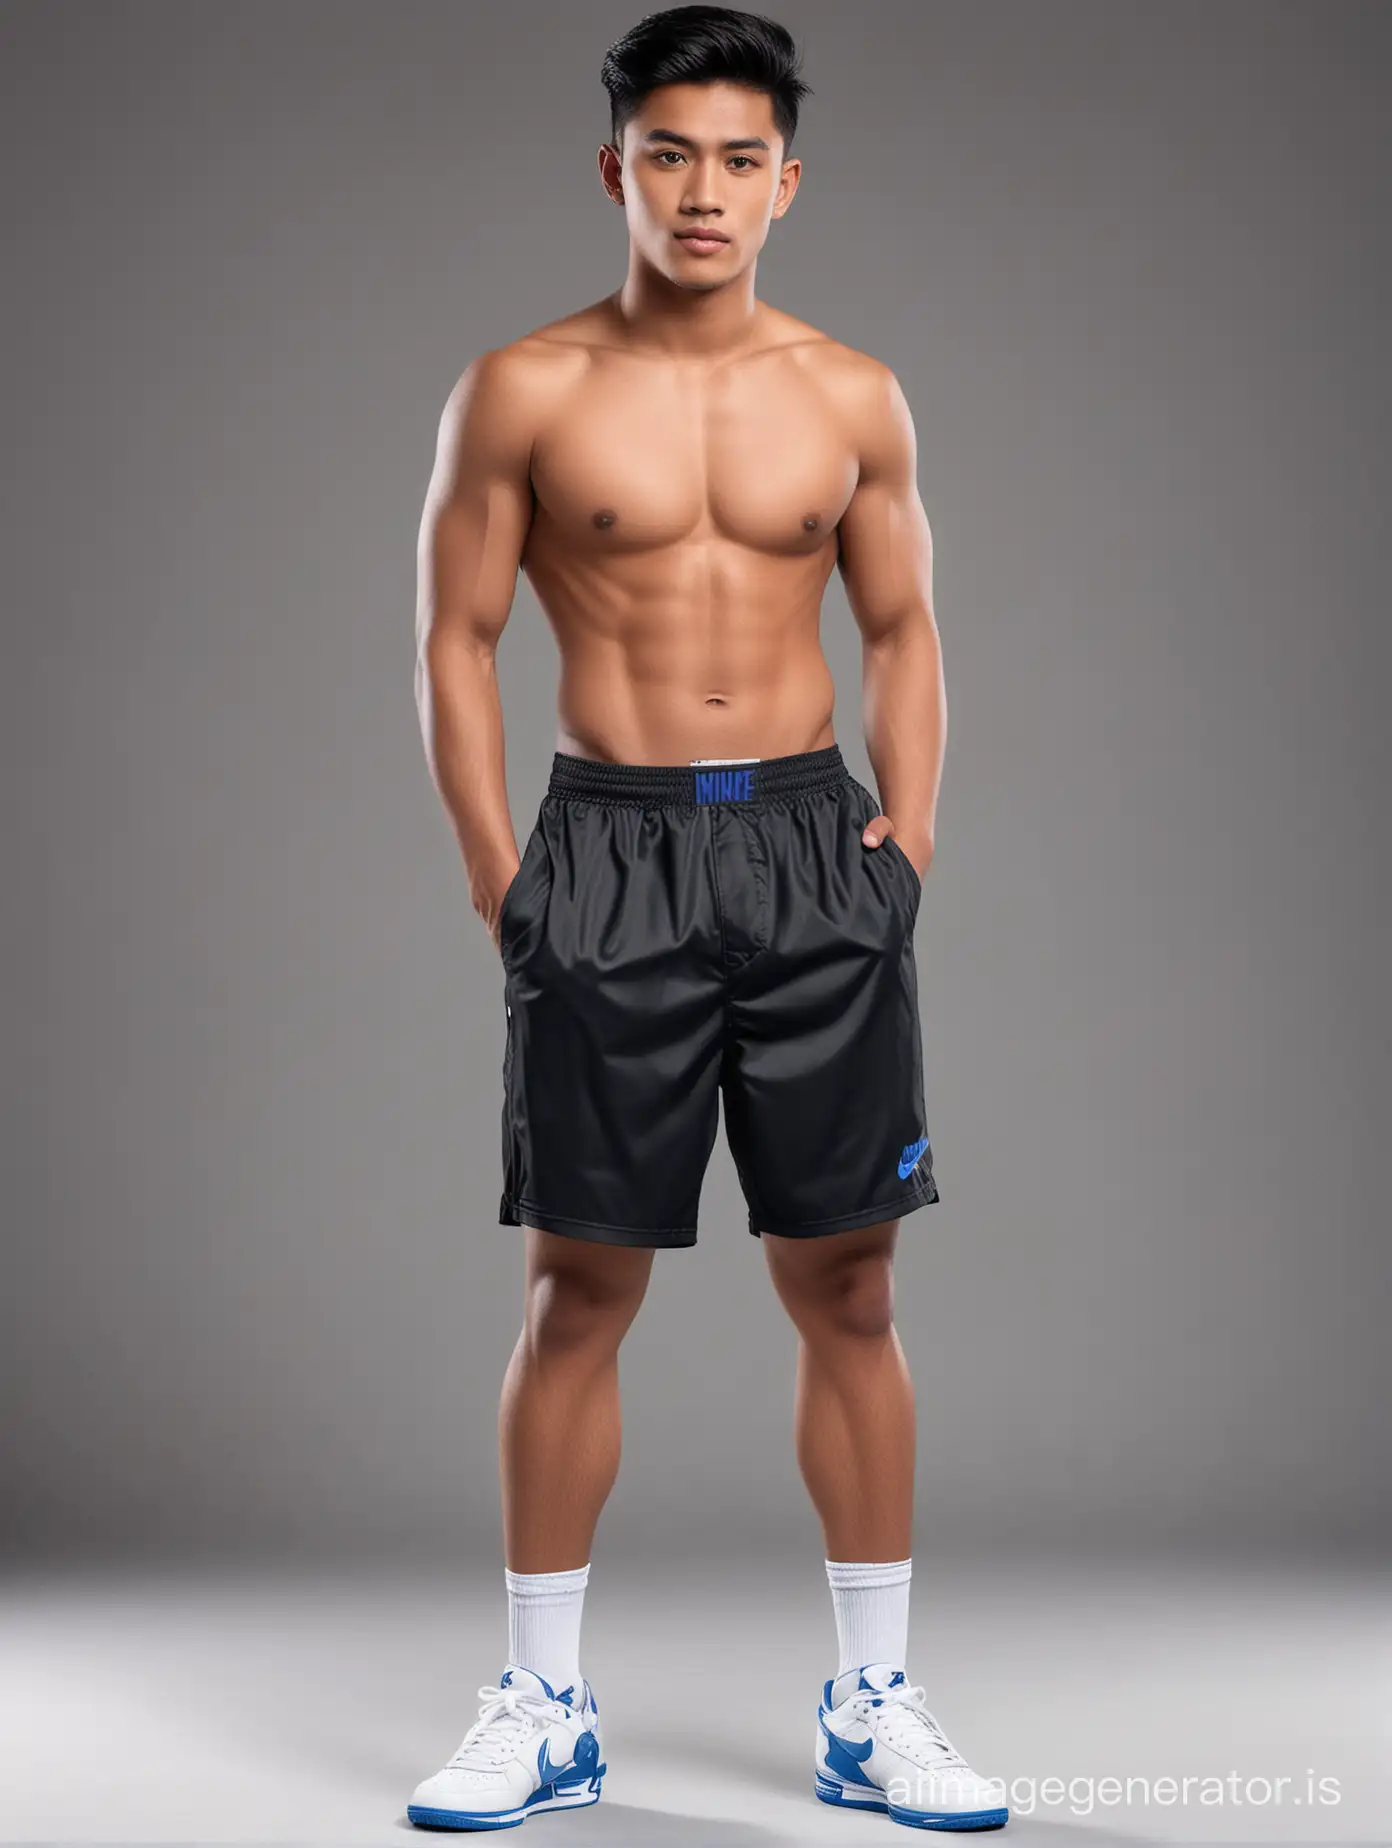 A young Indonesian handsome man, aged 21 years old, black short with quiff hair style. Shirtless, wearing white Renoma briefs, blue Nike shoes. Posing for attire promo stand straight, and looking at the camera, Background charcoal black.